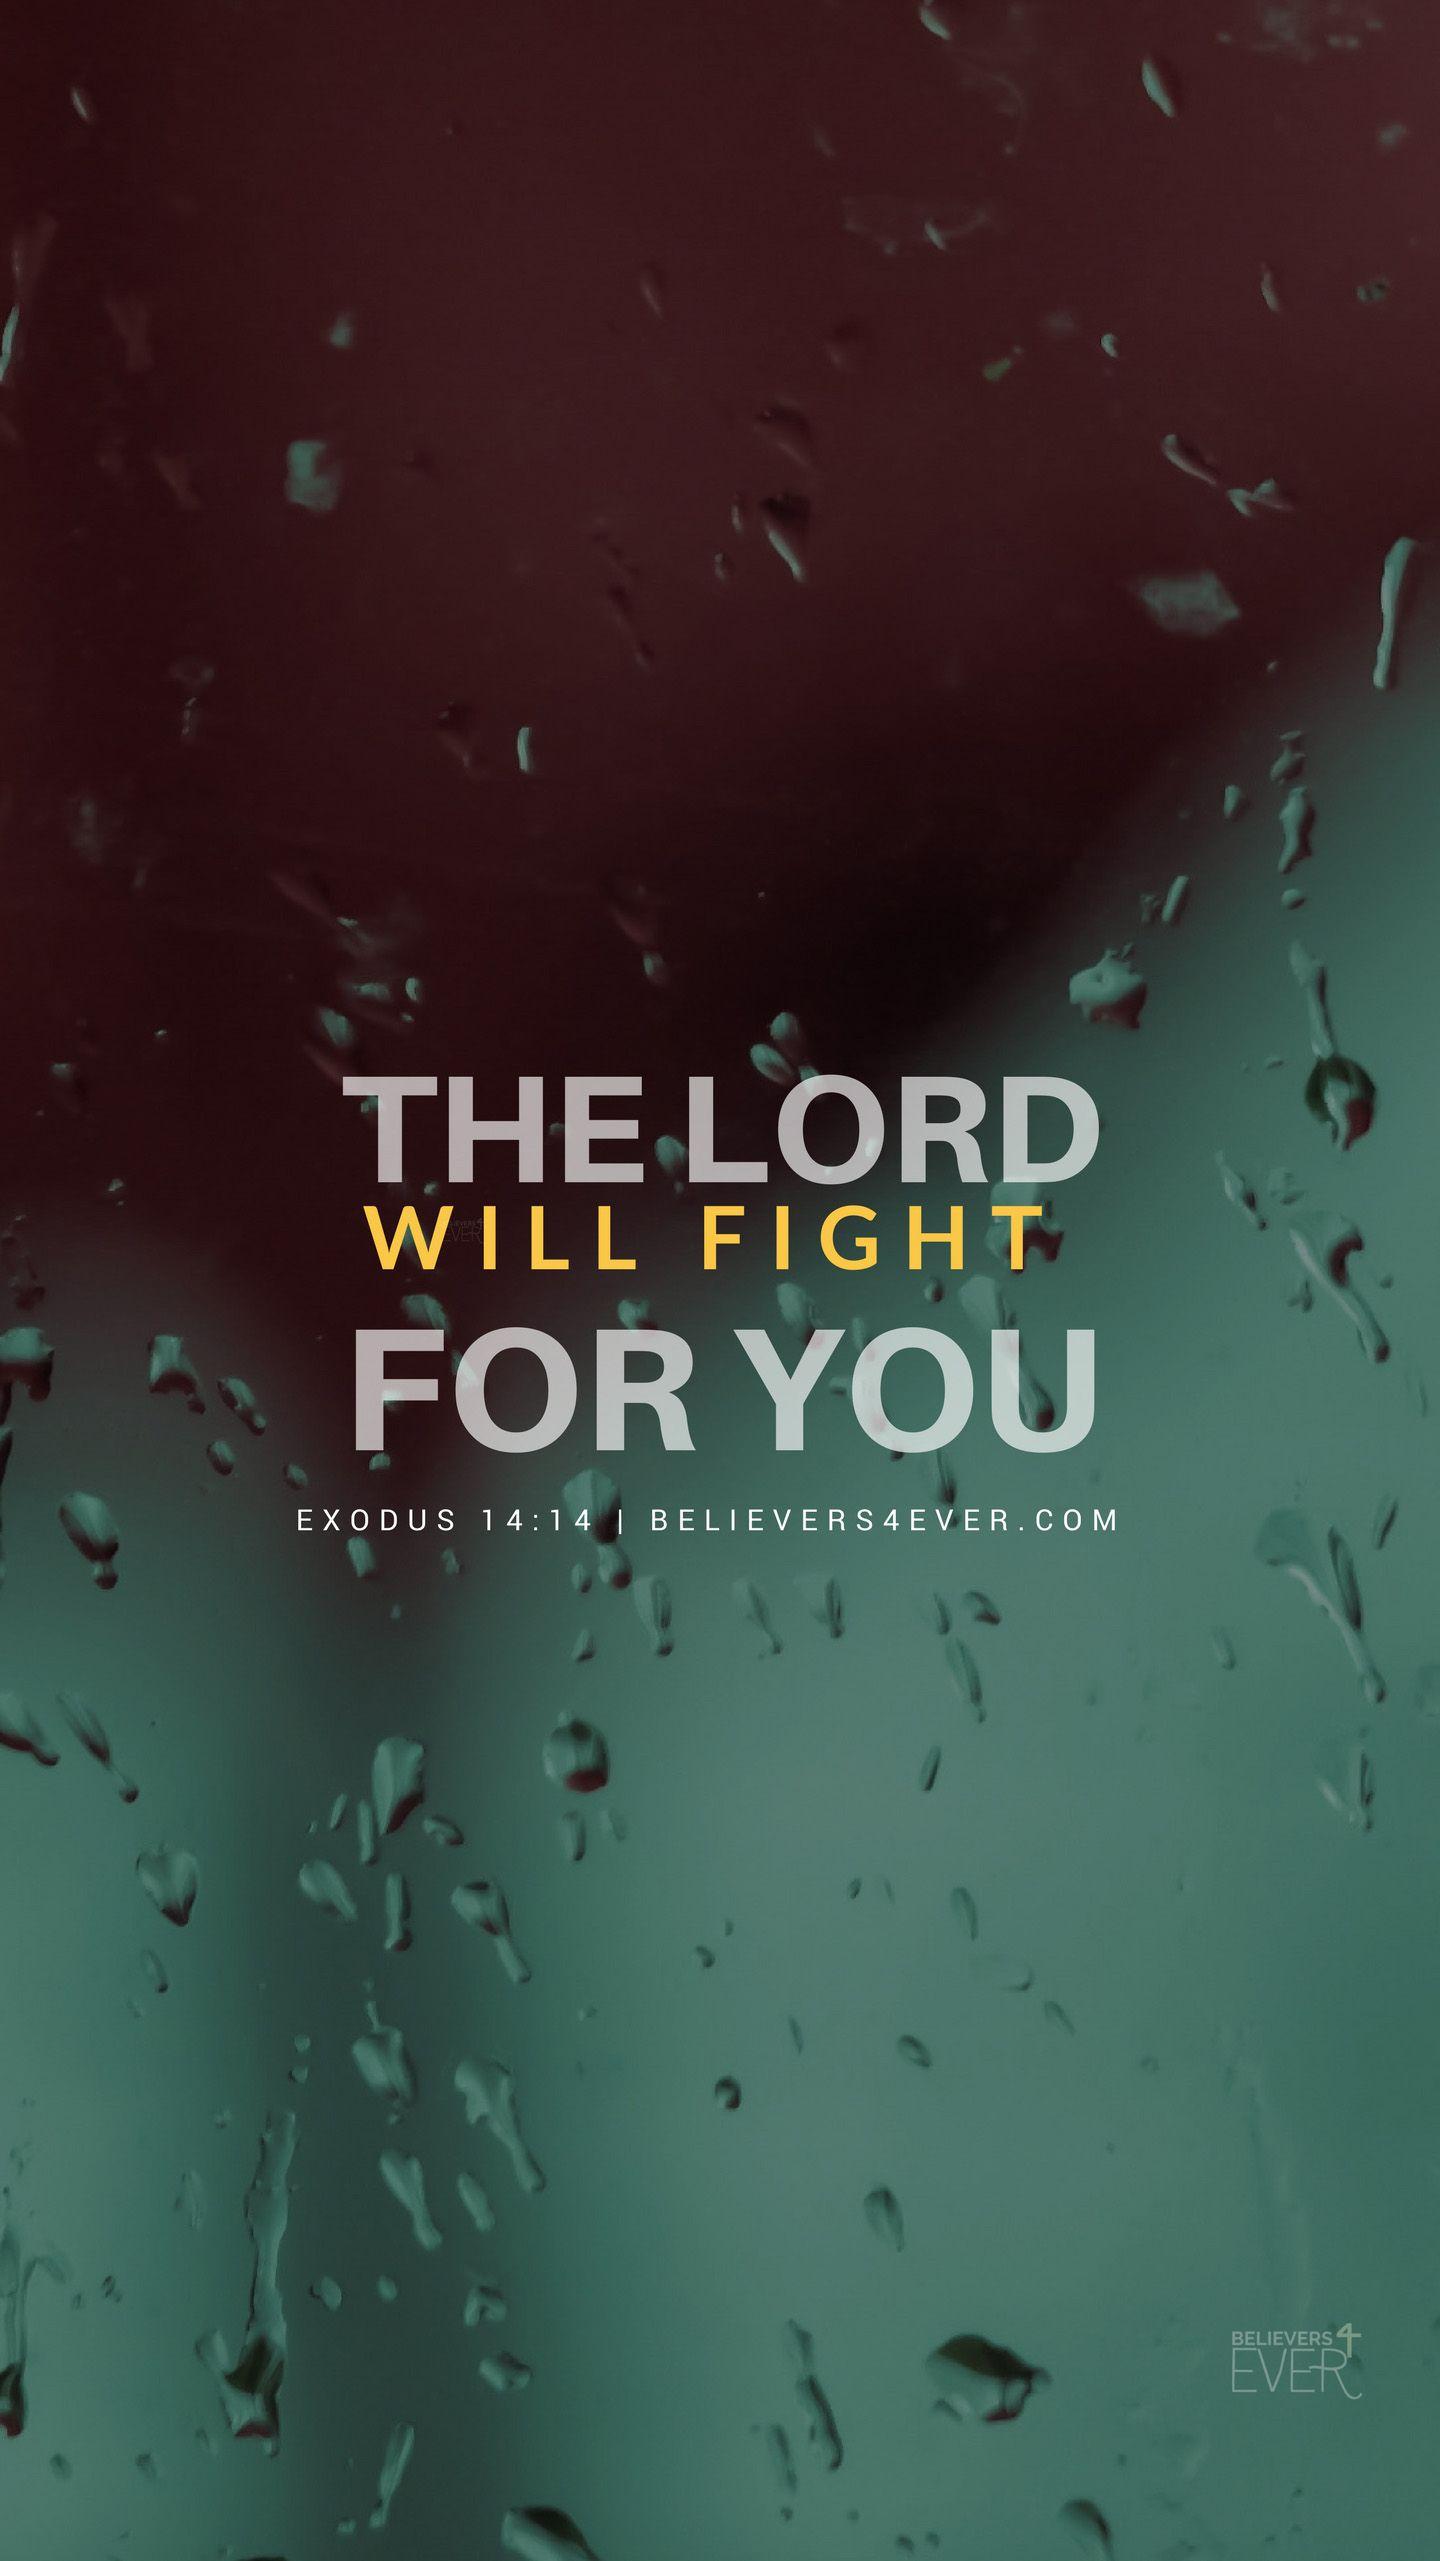 The Lord will fight for you. Bible quotes, Bible